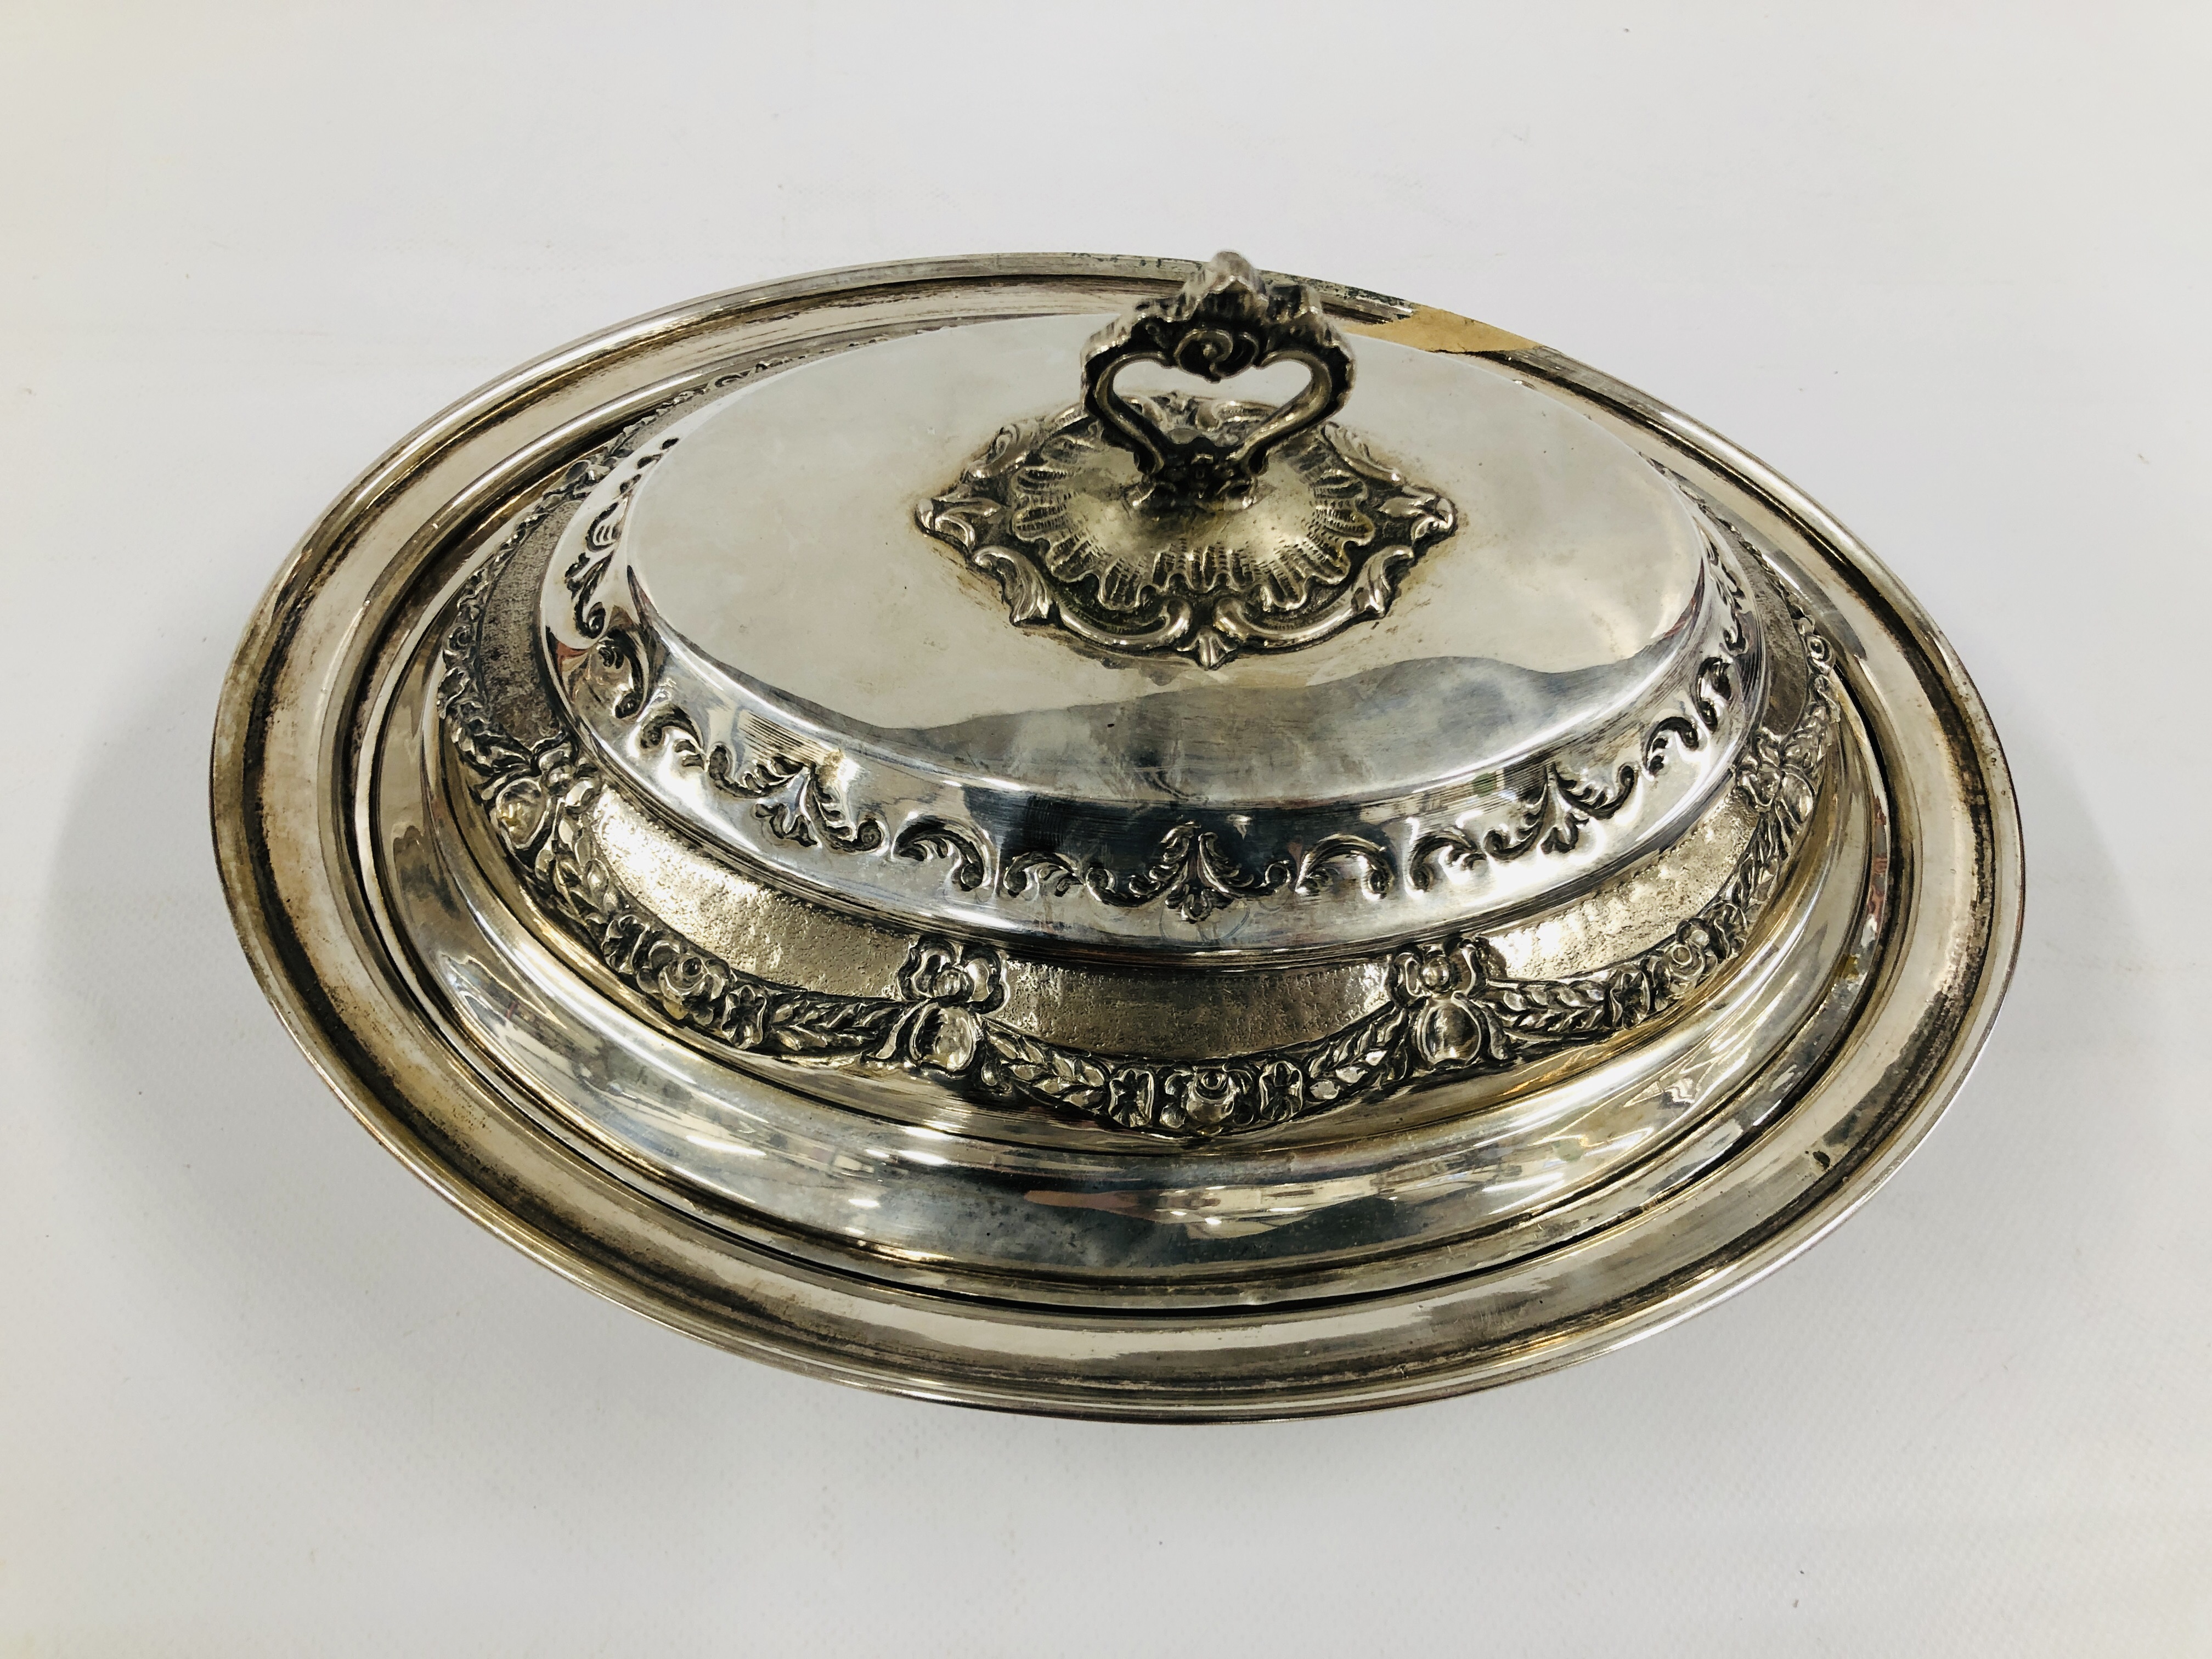 A CONTINENTAL SILVER OVAL TUREEN AND COVER, DECORATED WITH GARLANDS, BASE STAMPED 900, L 30. - Image 2 of 13